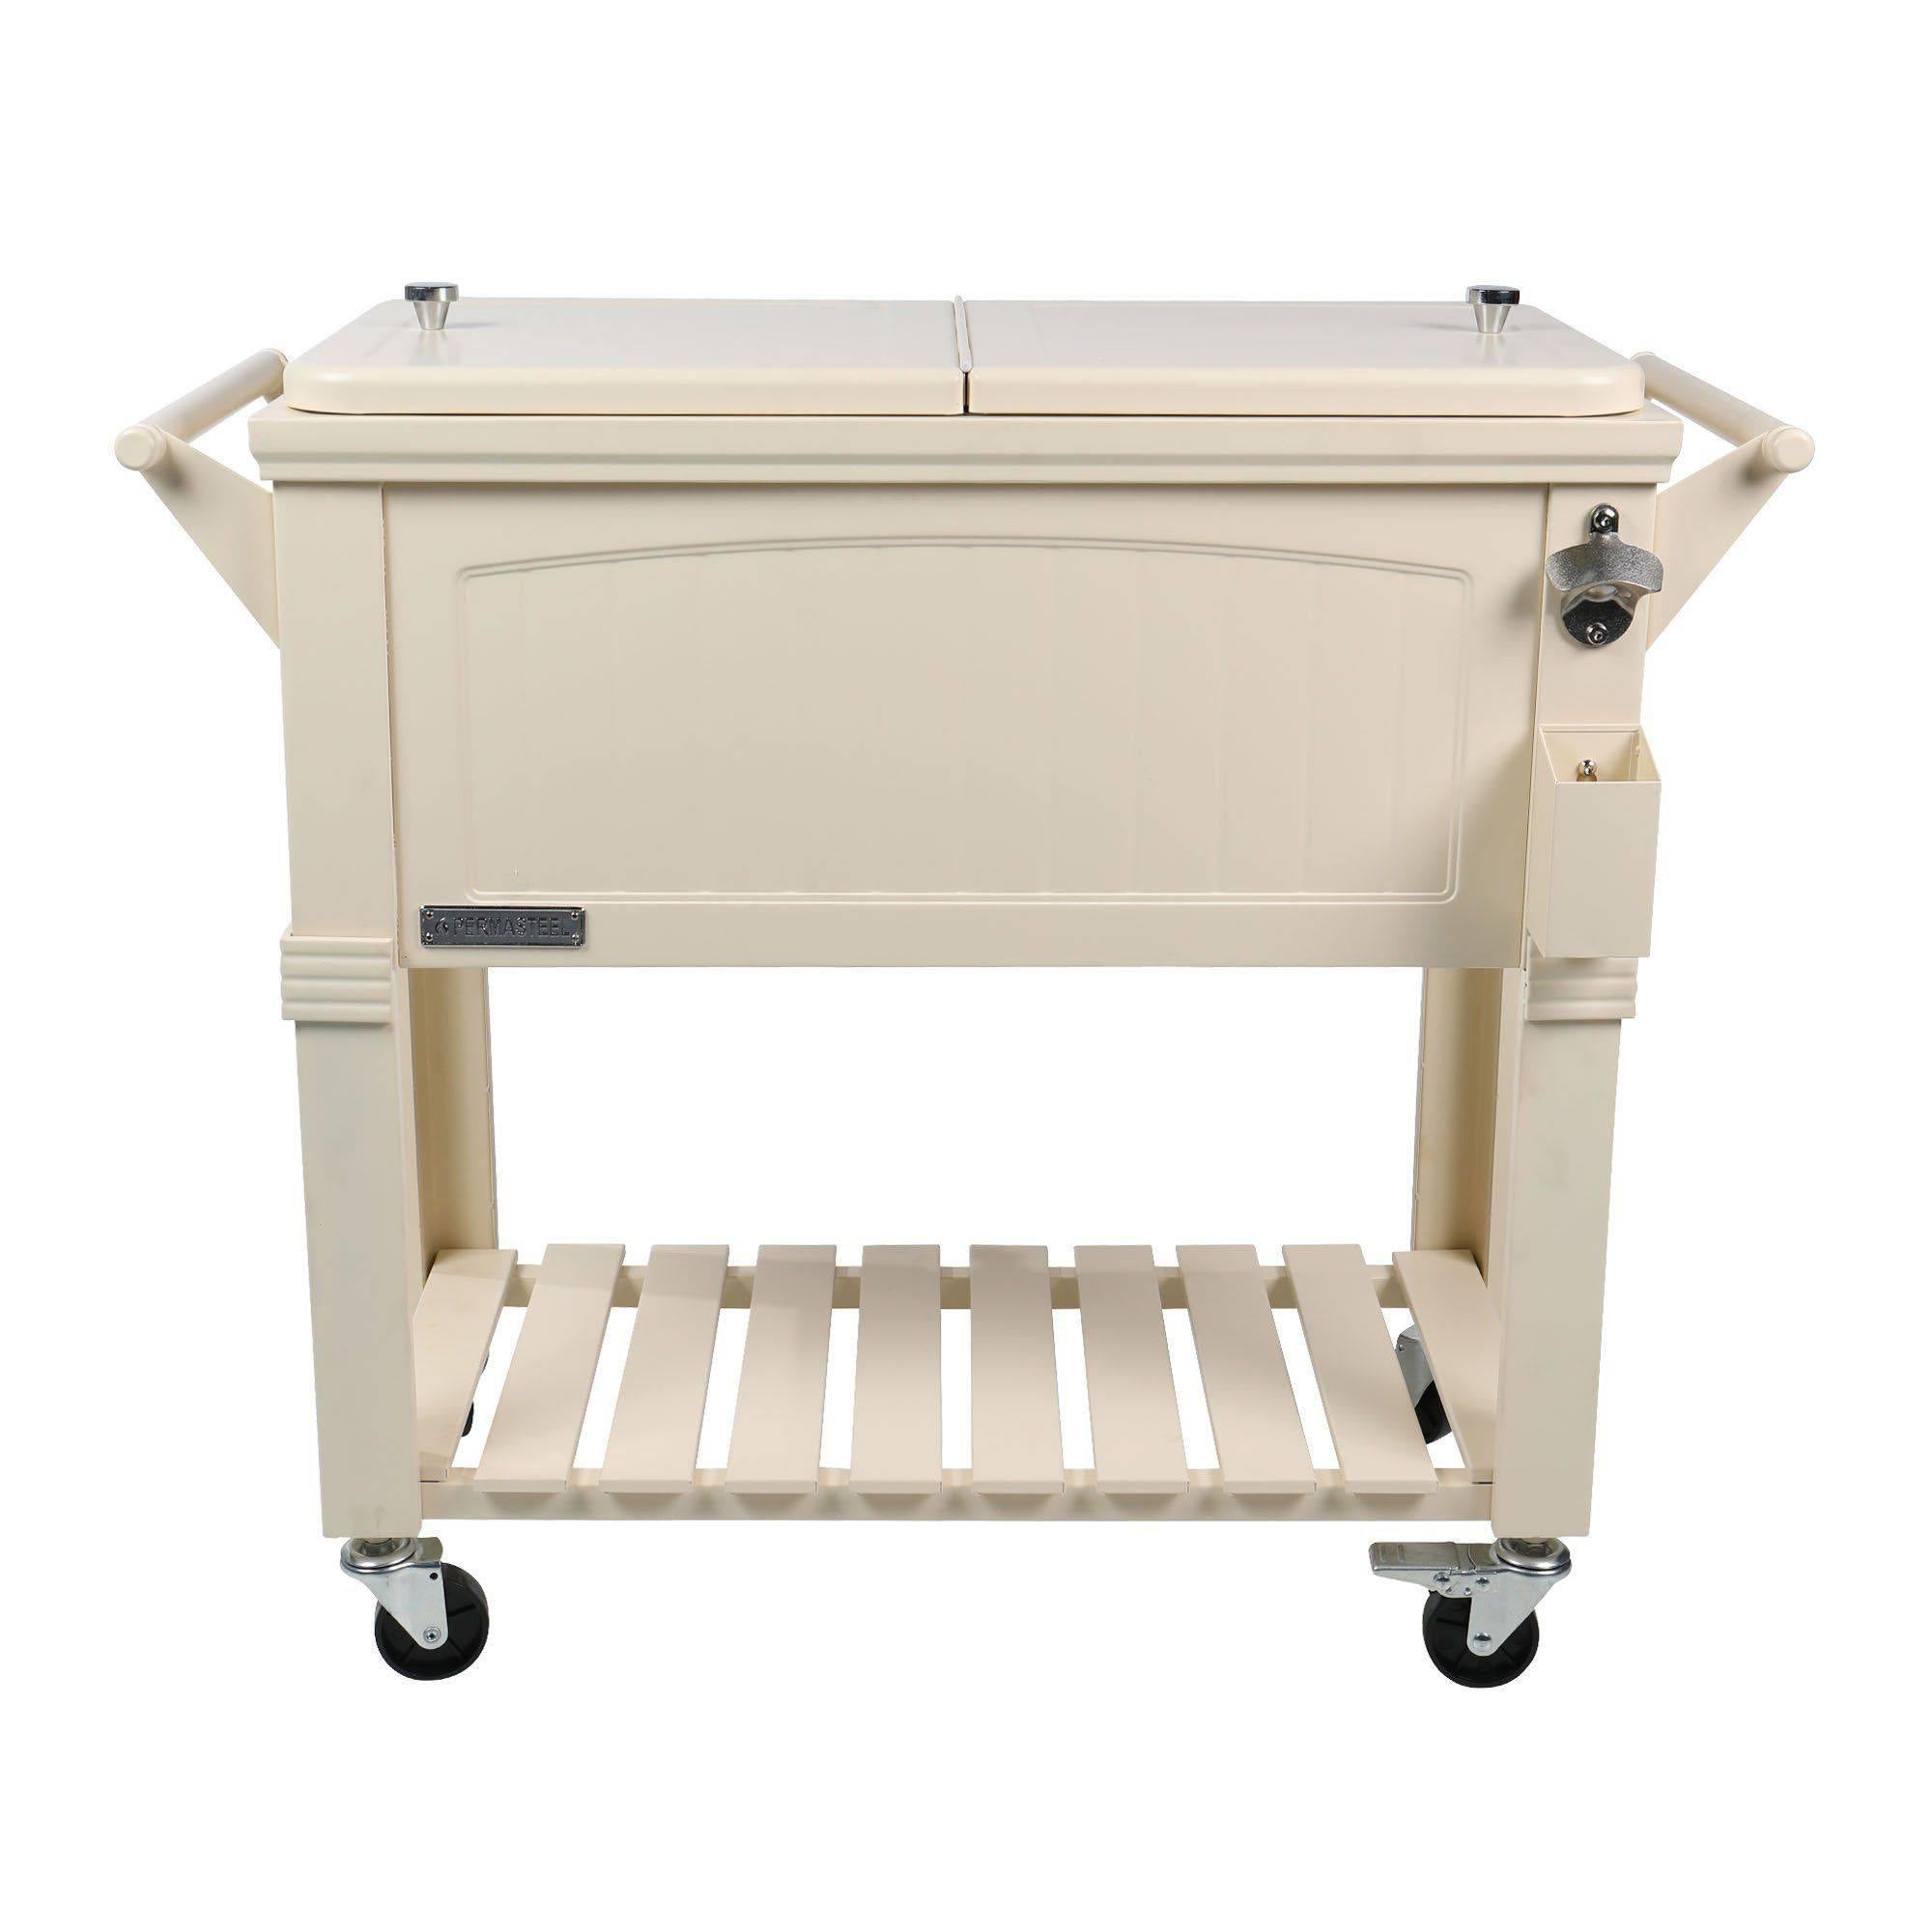 Patio Cooler Furniture Style - 80QT - Dti Direct USA